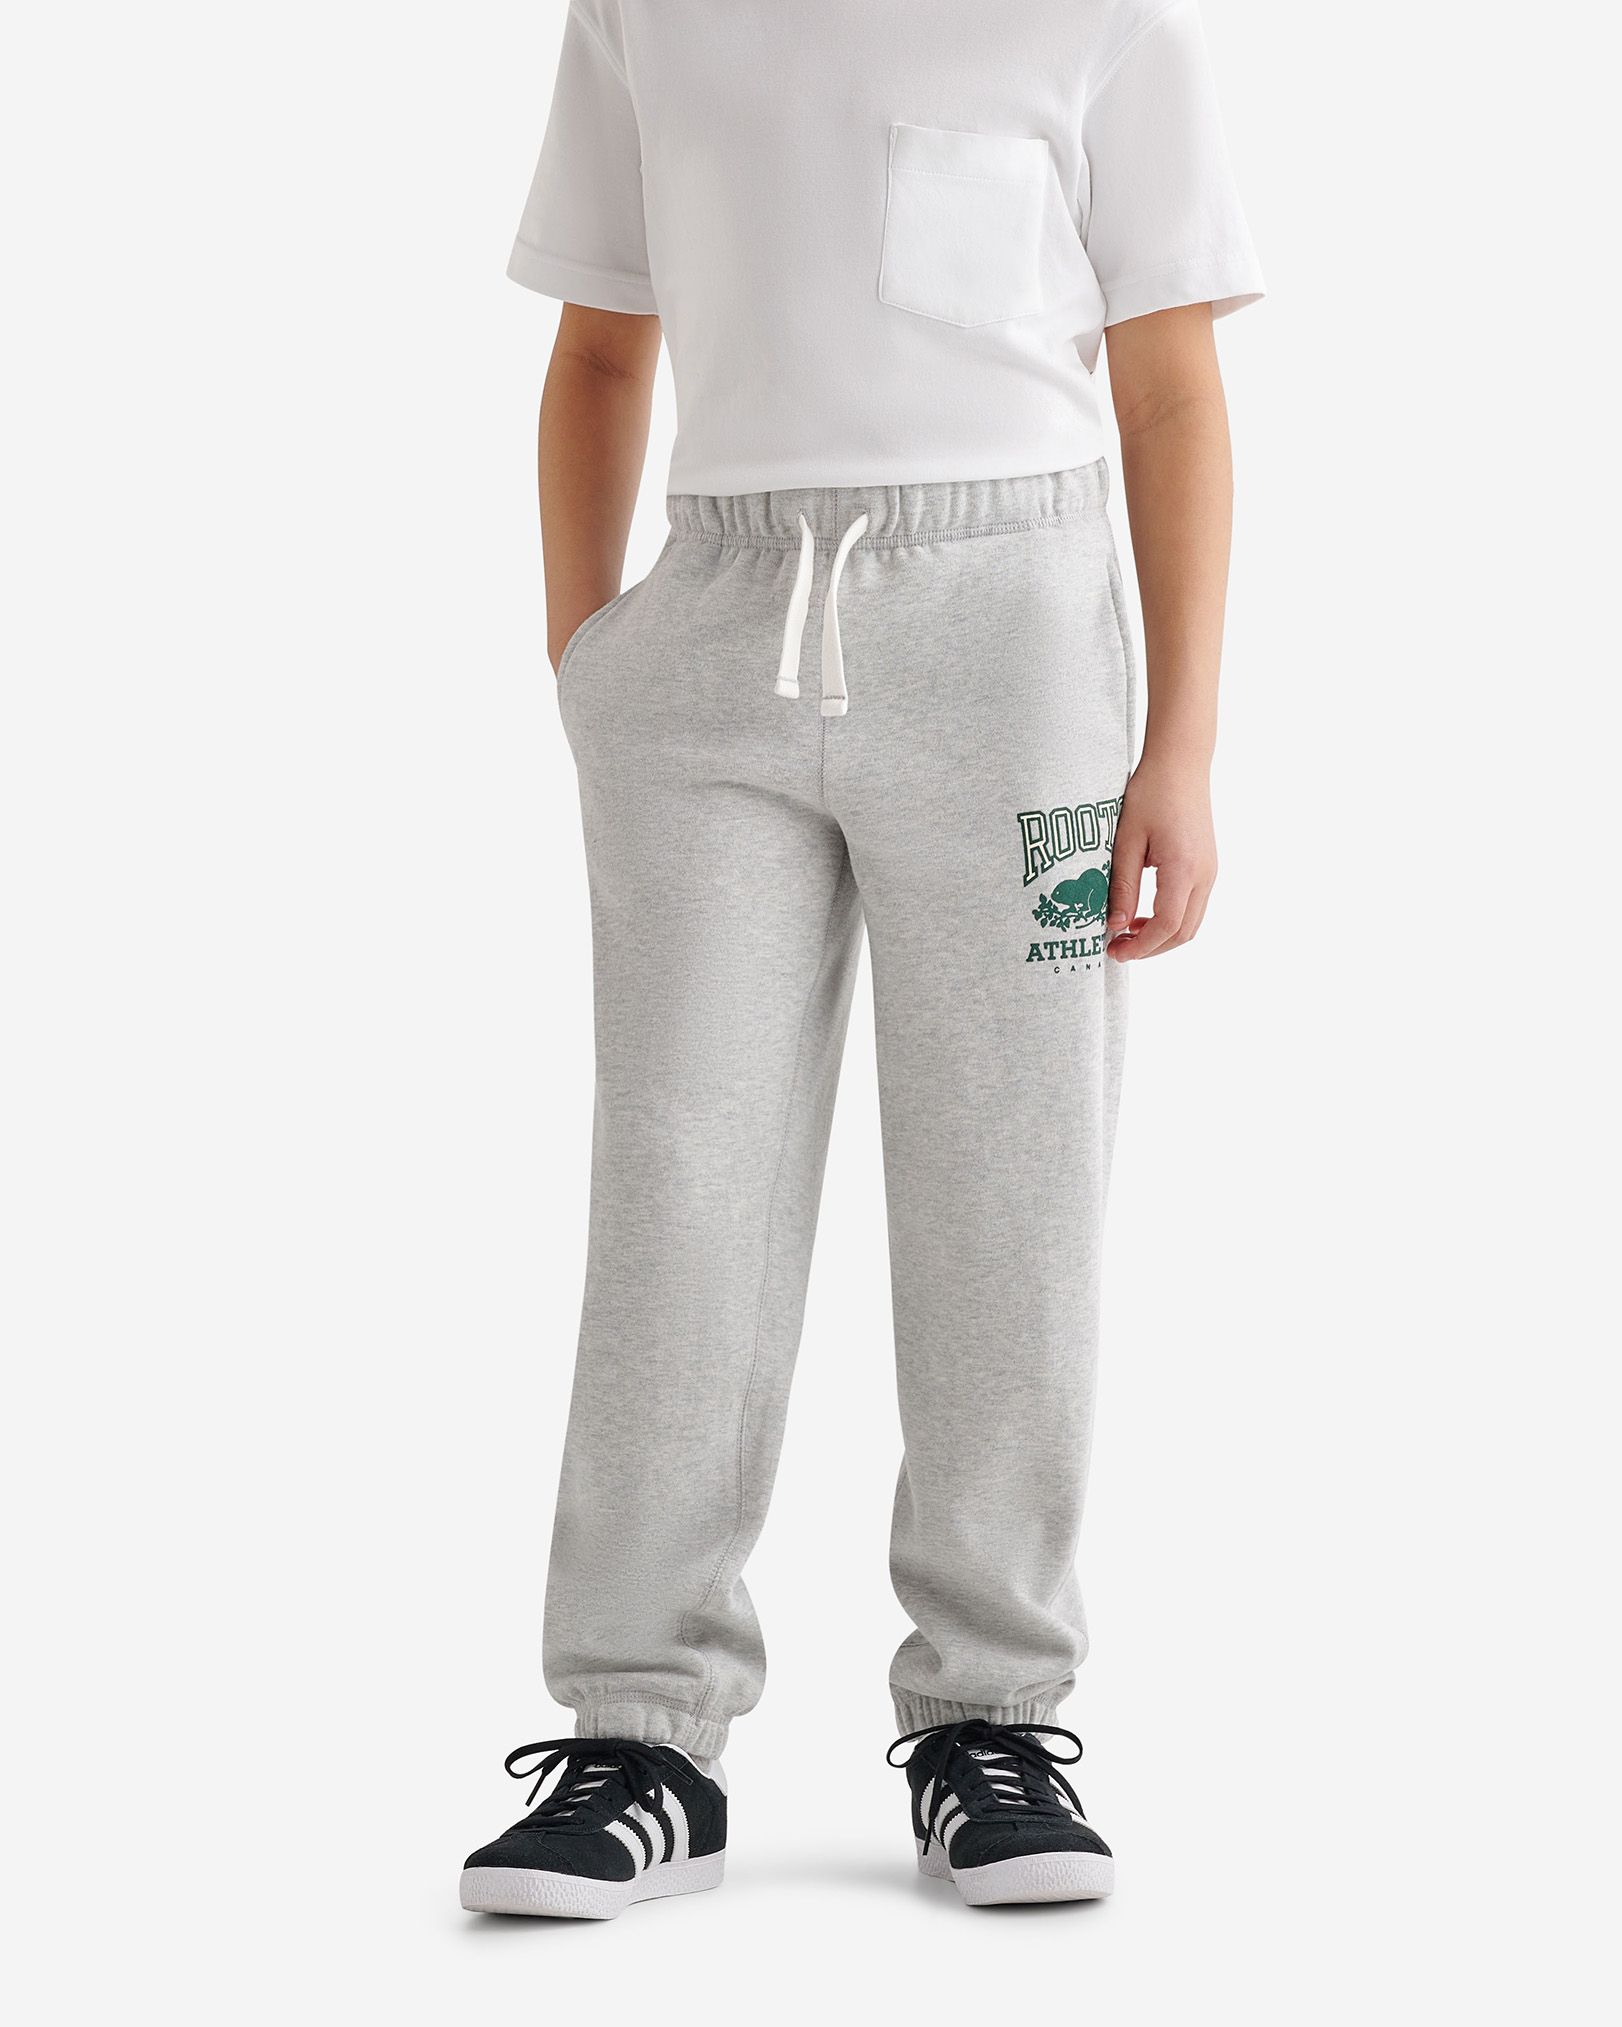 Roots Kids RBA Sweatpant in Athletic Grey Mix